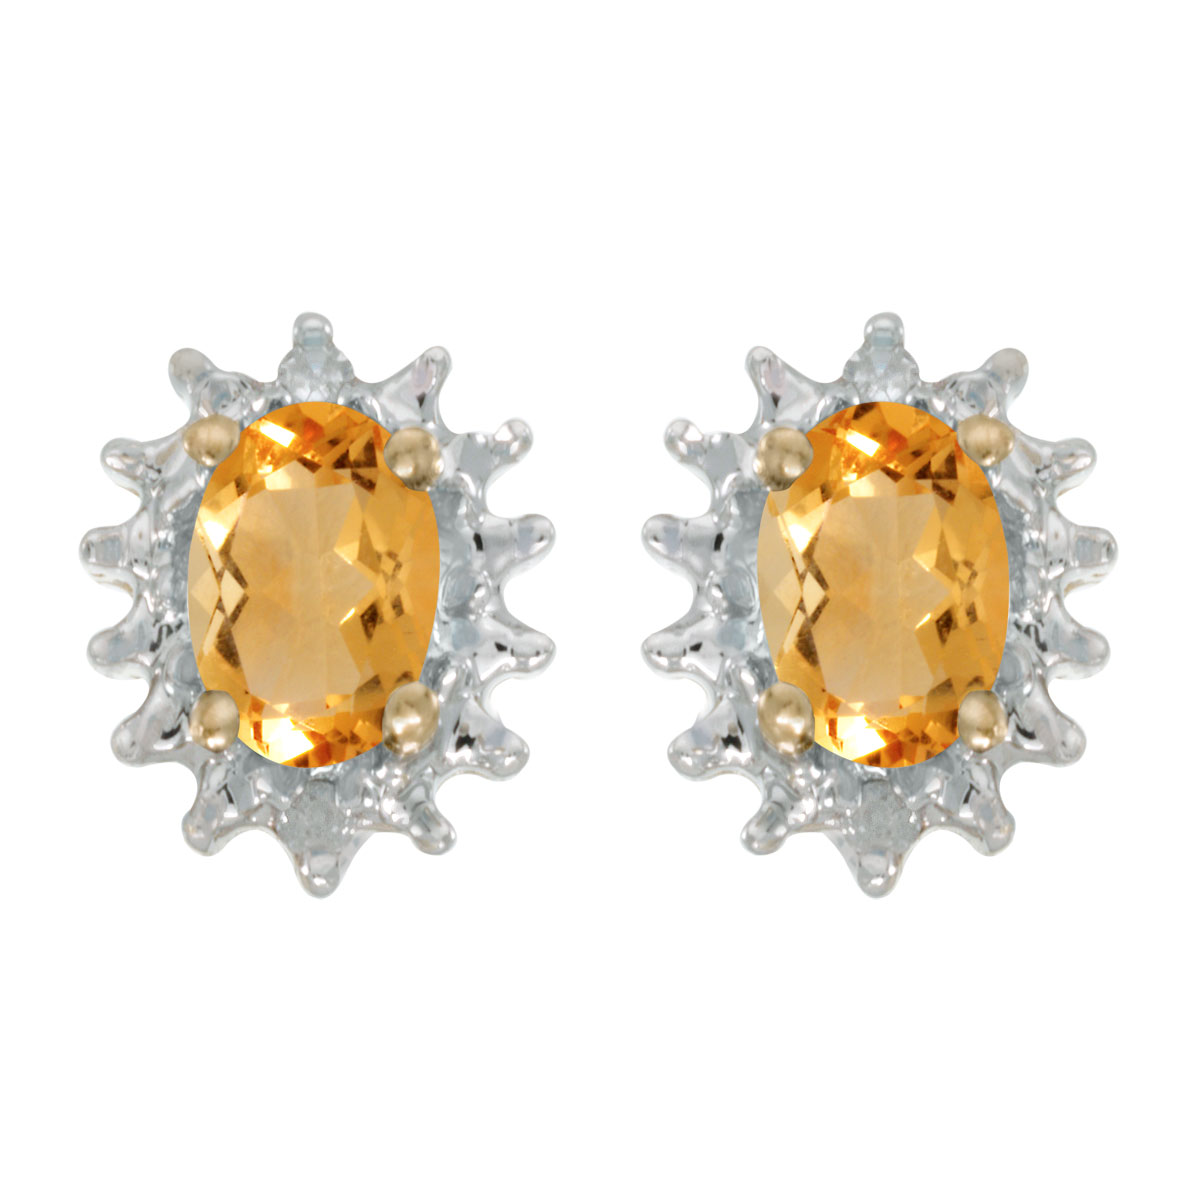 These 14k yellow gold oval citrine and diamond earrings feature 6x4 mm genuine natural citrines w...